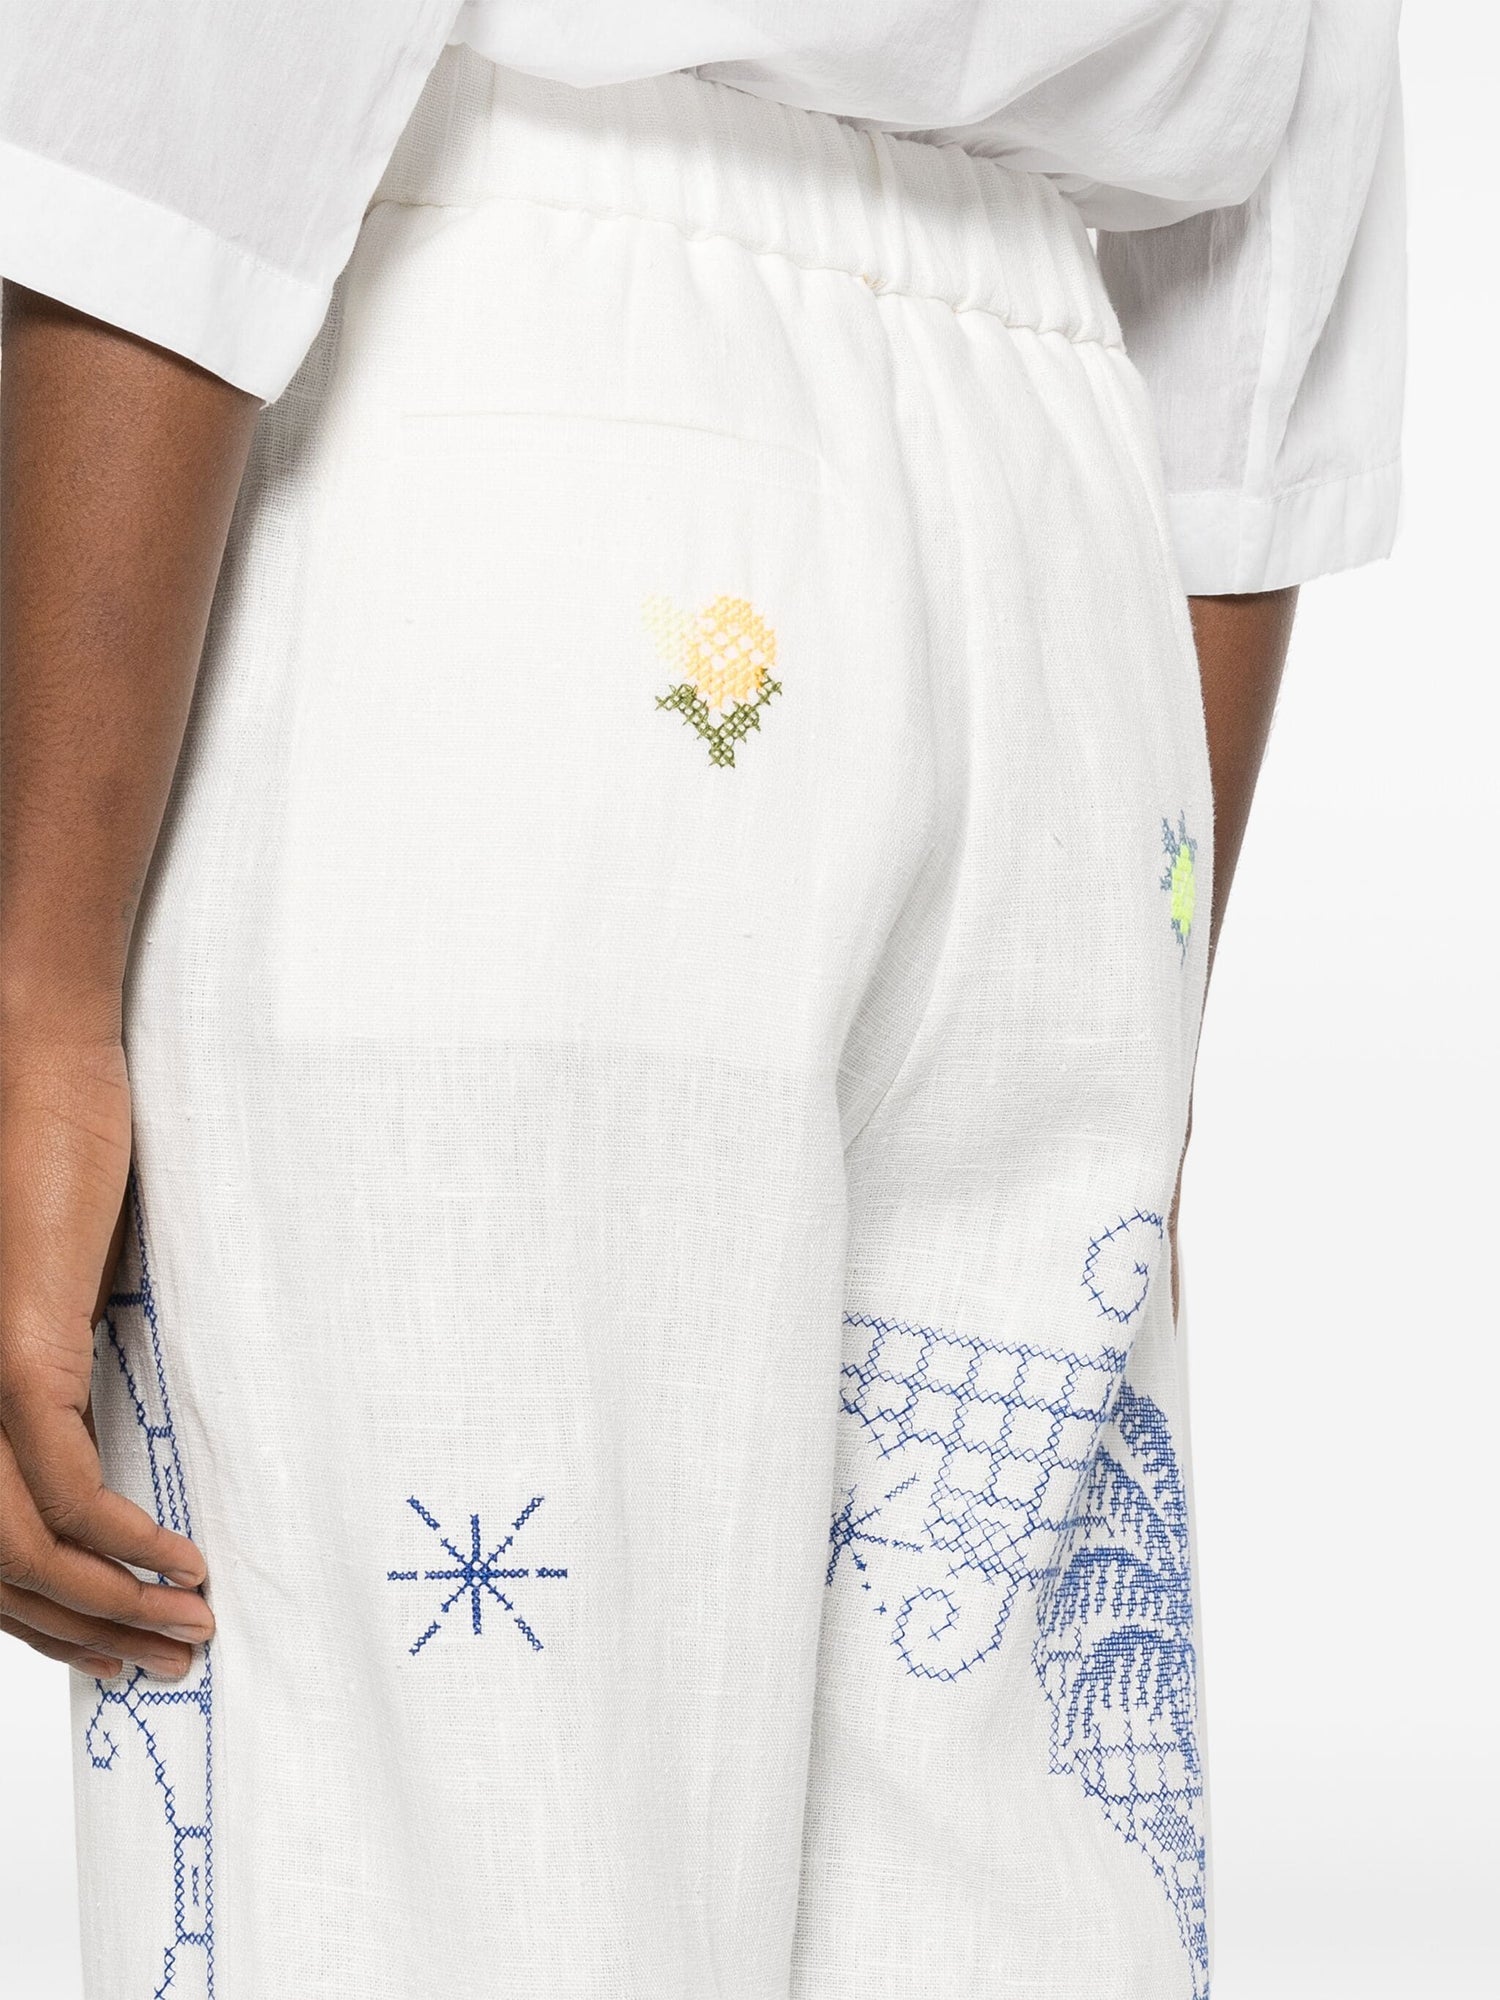 Embroidery linen pants, white